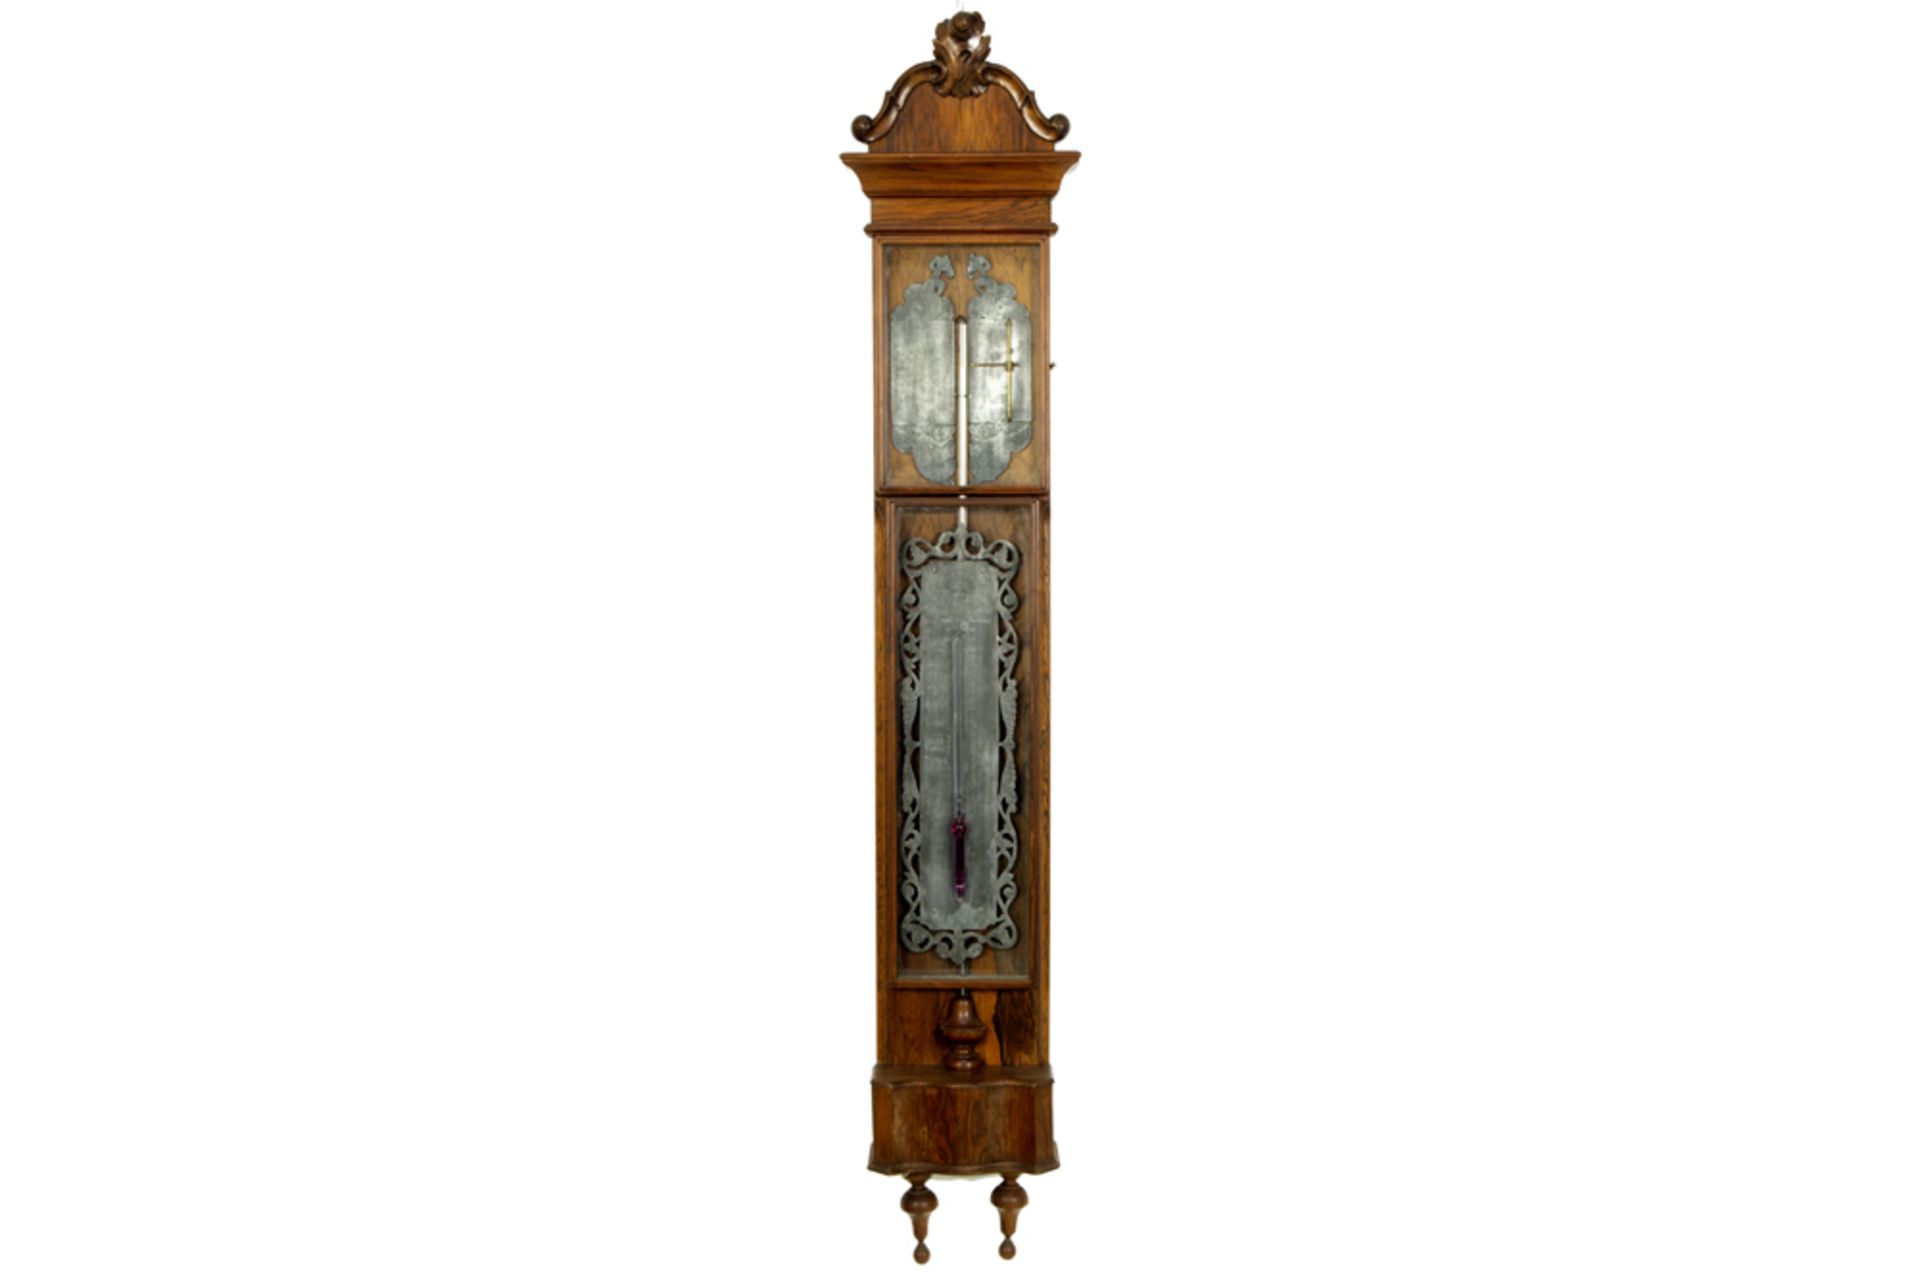 18th Cent. Dutch barometer with its case in rose-wood and its work signed Rosselli - Amsterdam and